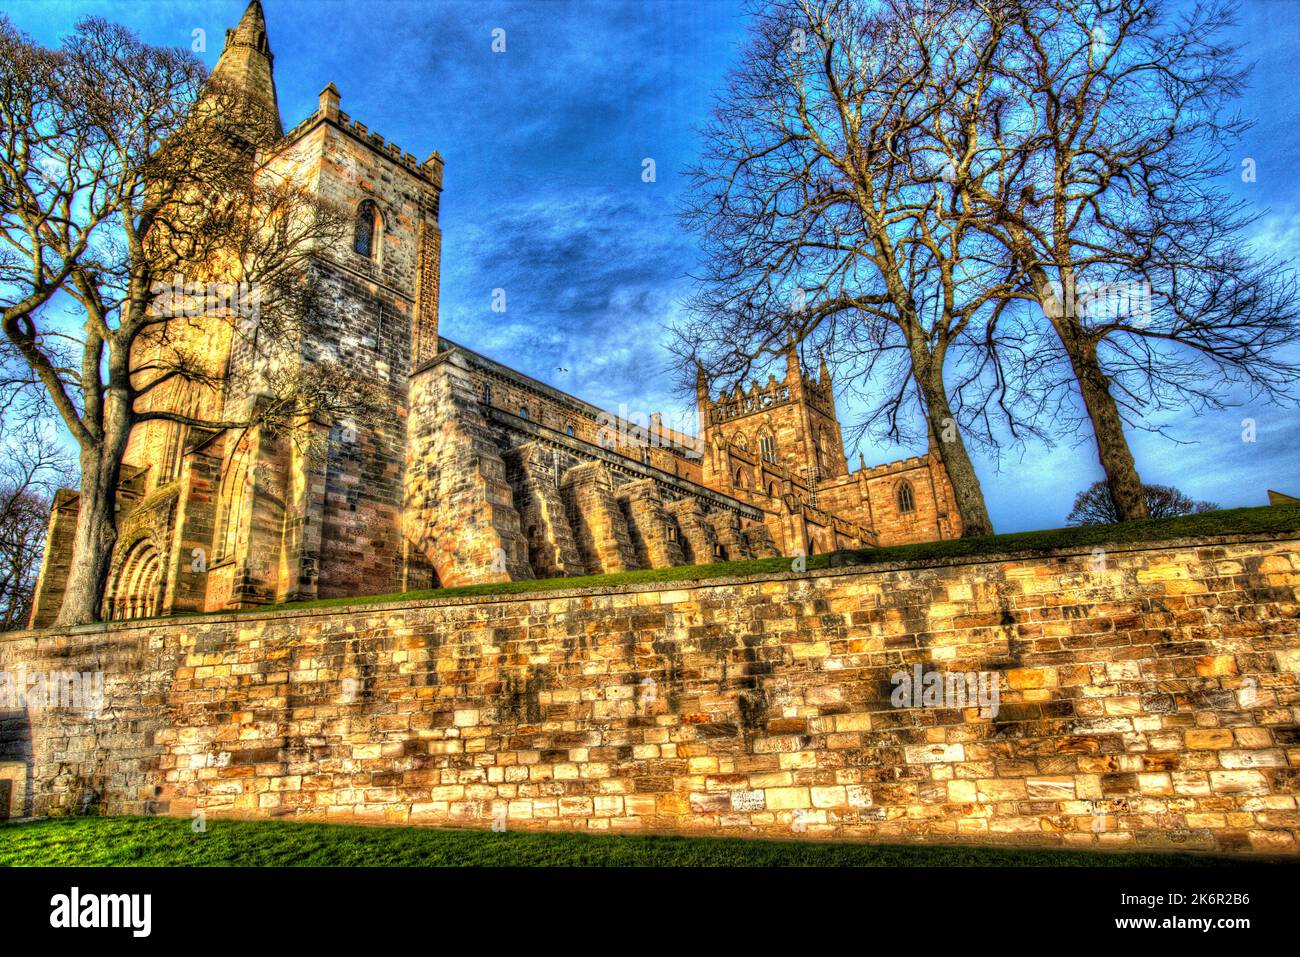 City of Dunfermline, Scotland. Artistic view of the western and southern façade of Dunfermline Abbey. Stock Photo